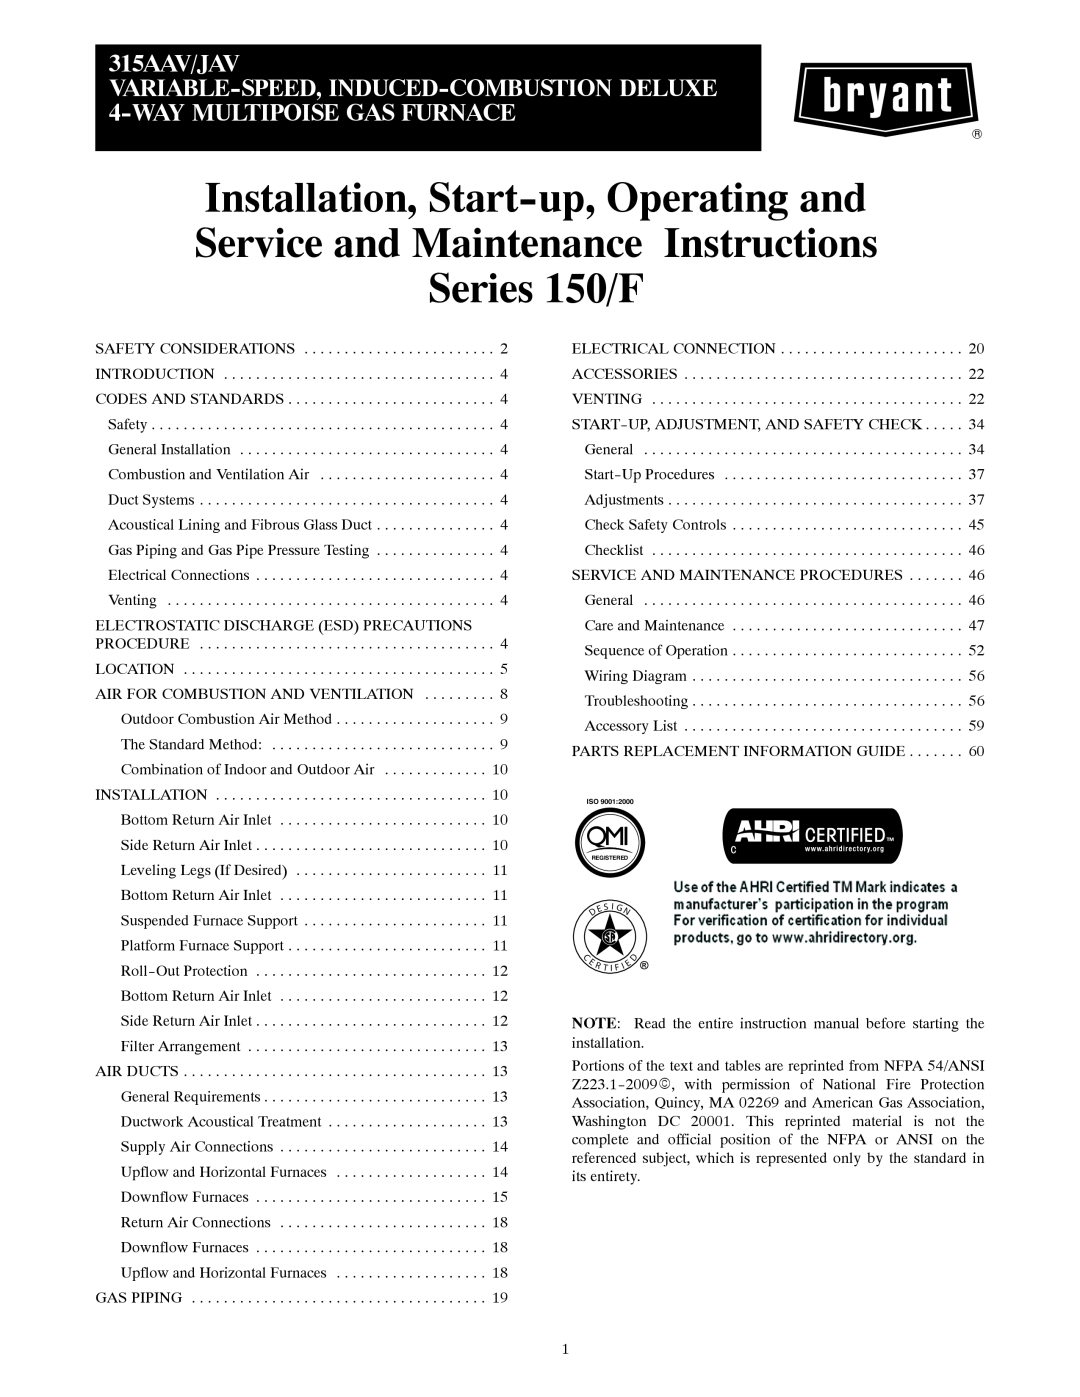 Bryant 315AAV instruction manual Installation, Start-up,Operating and, Service and Maintenance Instructions Series 150/F 